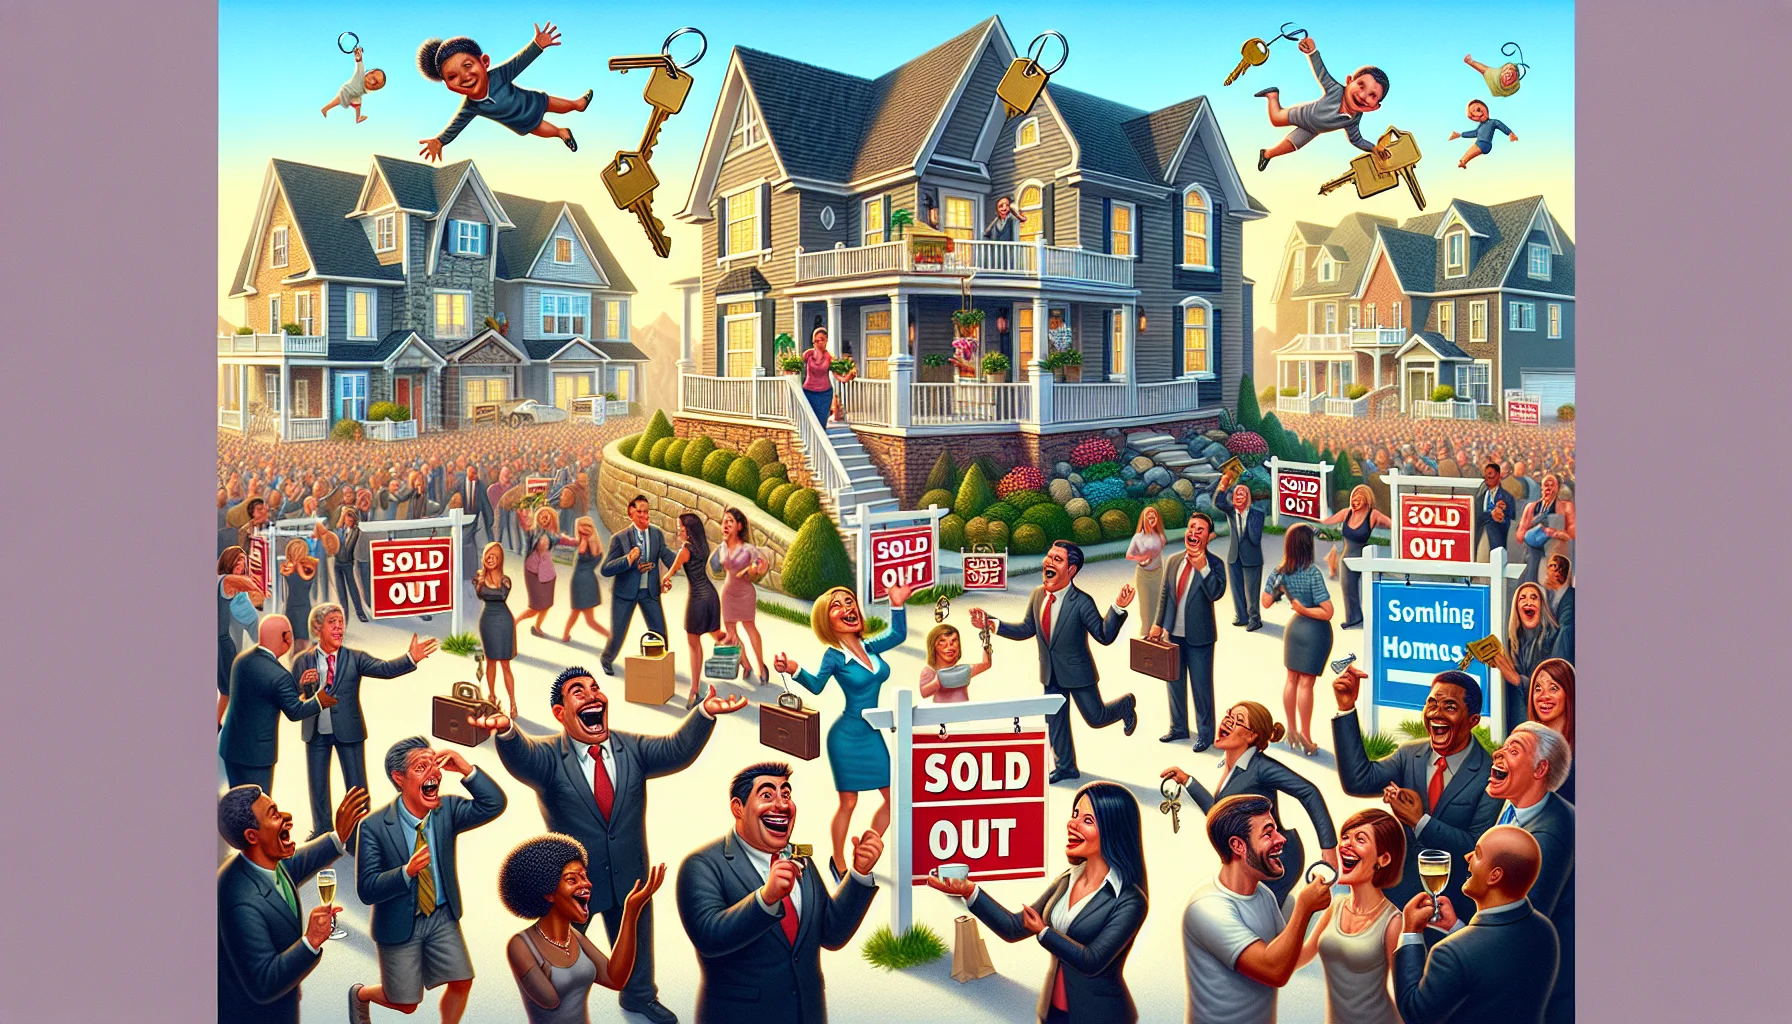 Visualize a humorous and idealistic scenario in a bustling home market. The scene should showcase a diverse, animated crowd of people from various descents such as Black, Hispanic, Caucasian, and Middle Eastern, and genders, all animatedly engaging in real estate transactions. There could be a man holding and admiring multiple keys to his newly bought dream houses. A woman could be high-fiving her real estate agent after owning a picturesque home. There should be happy 'Sold Out' signs in front of beautiful, picture-perfect houses. The atmosphere should be energetic and full of excitement, symbolizing the prosperity of the perfect home market.